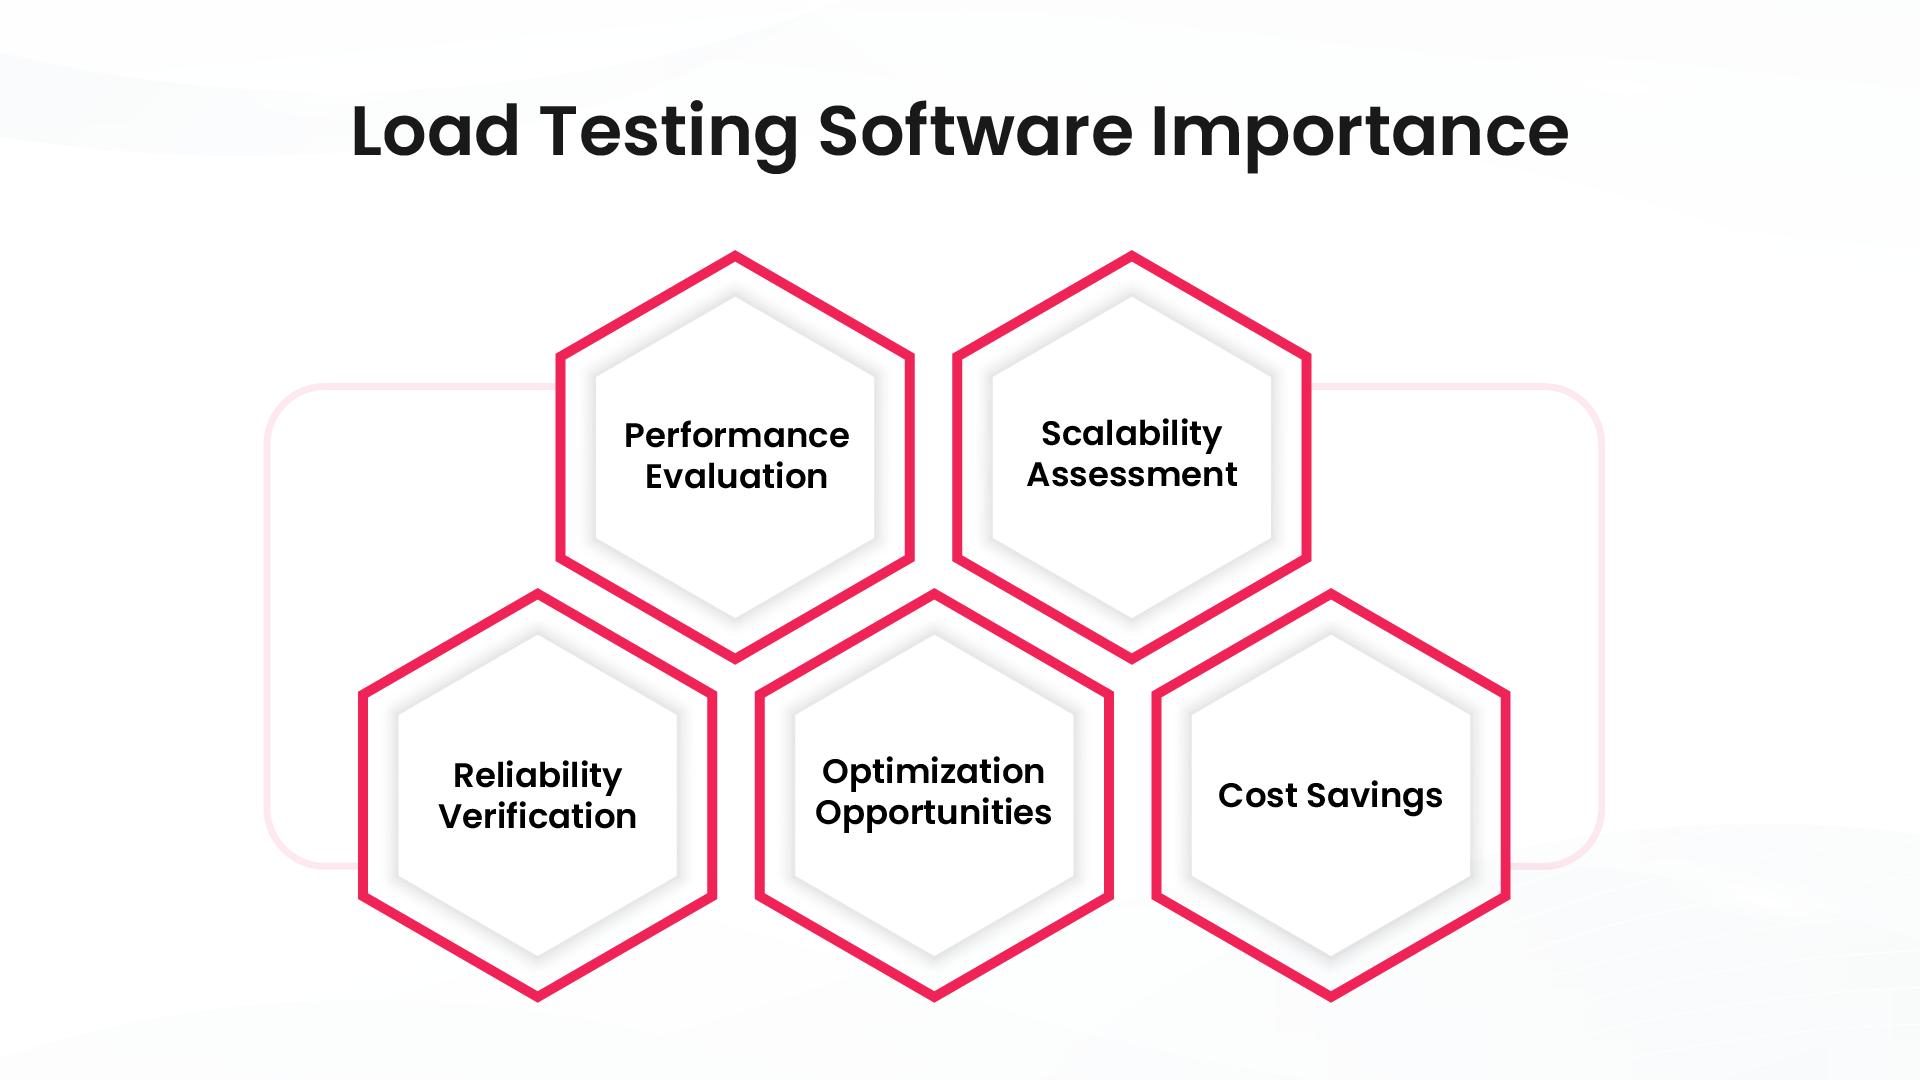 Load testing software importance